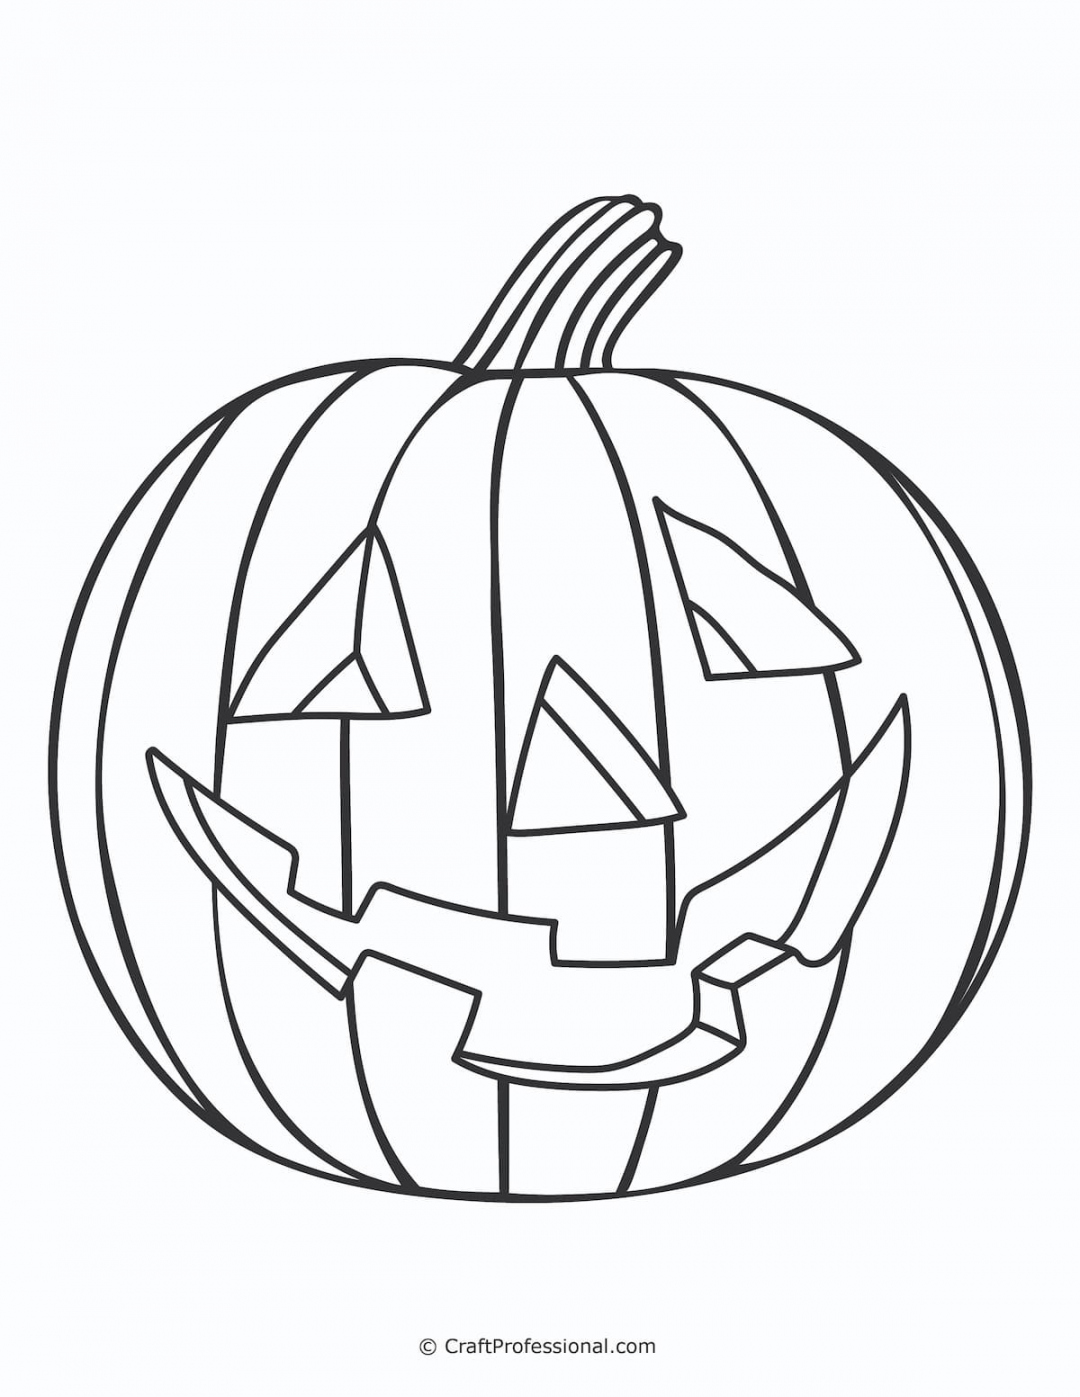 Free Printable Pumpkin Coloring Pages - Printable -  Pumpkin Coloring Pages - Free Printables for Kids & Adults to Color